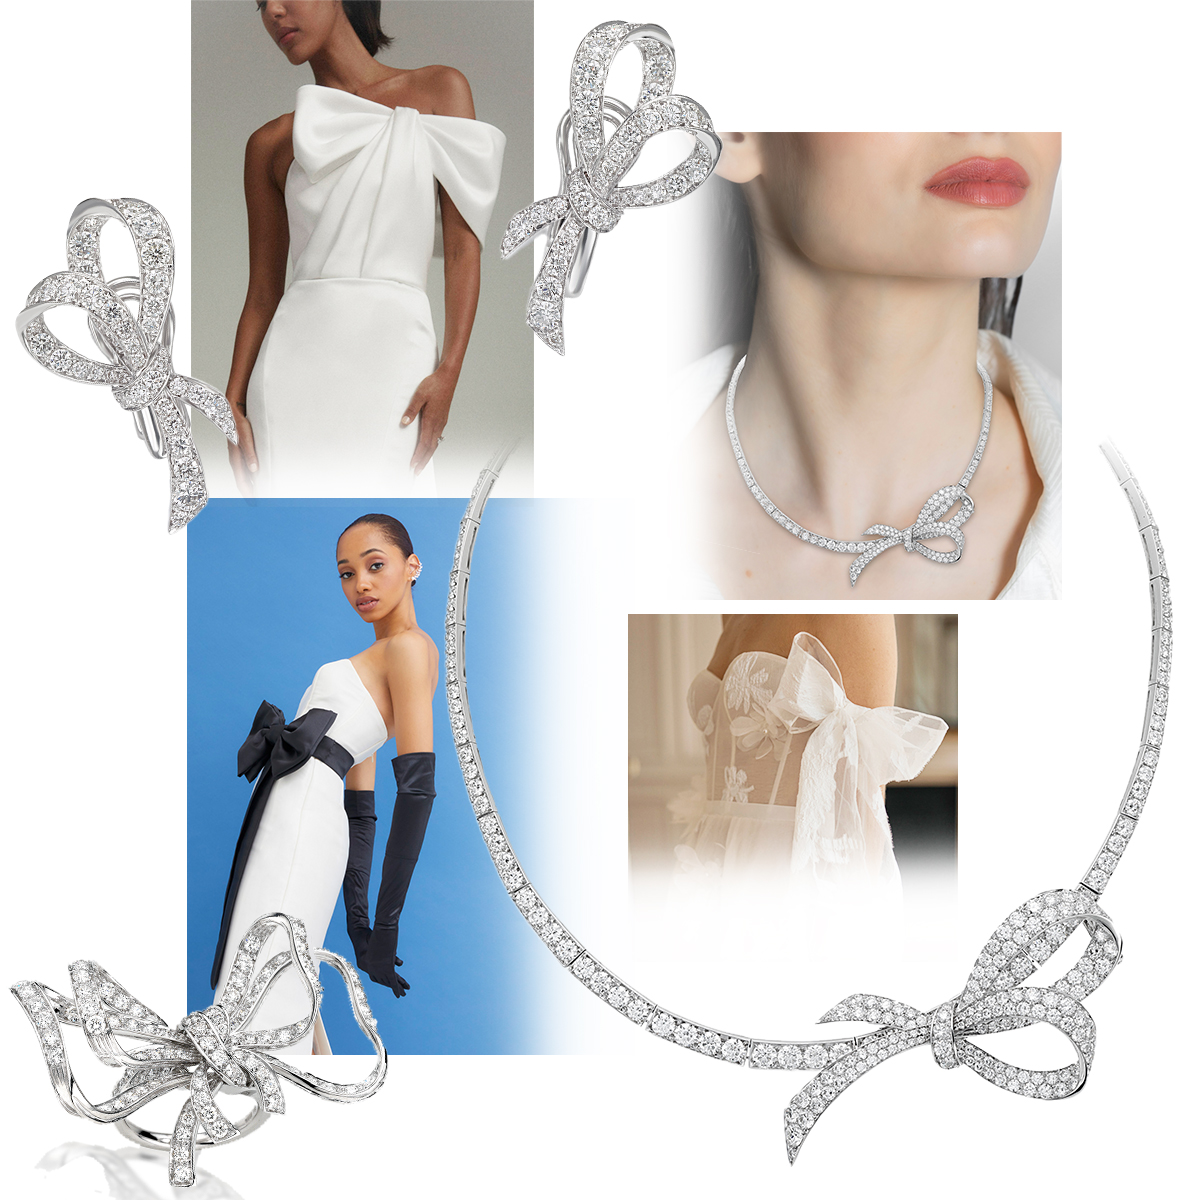 Clockwise from upper right – model wearing PICCHIOTTI Fiocco (Bow) necklace, Esien-Stein F/W2023, PICCHIOTTI Fiocco necklace, Scorcesa F/W 2023, PICCHIOTTI Fiocco ring, PICCHIOTTI Fiocco earrings, Amsale F/W 2023